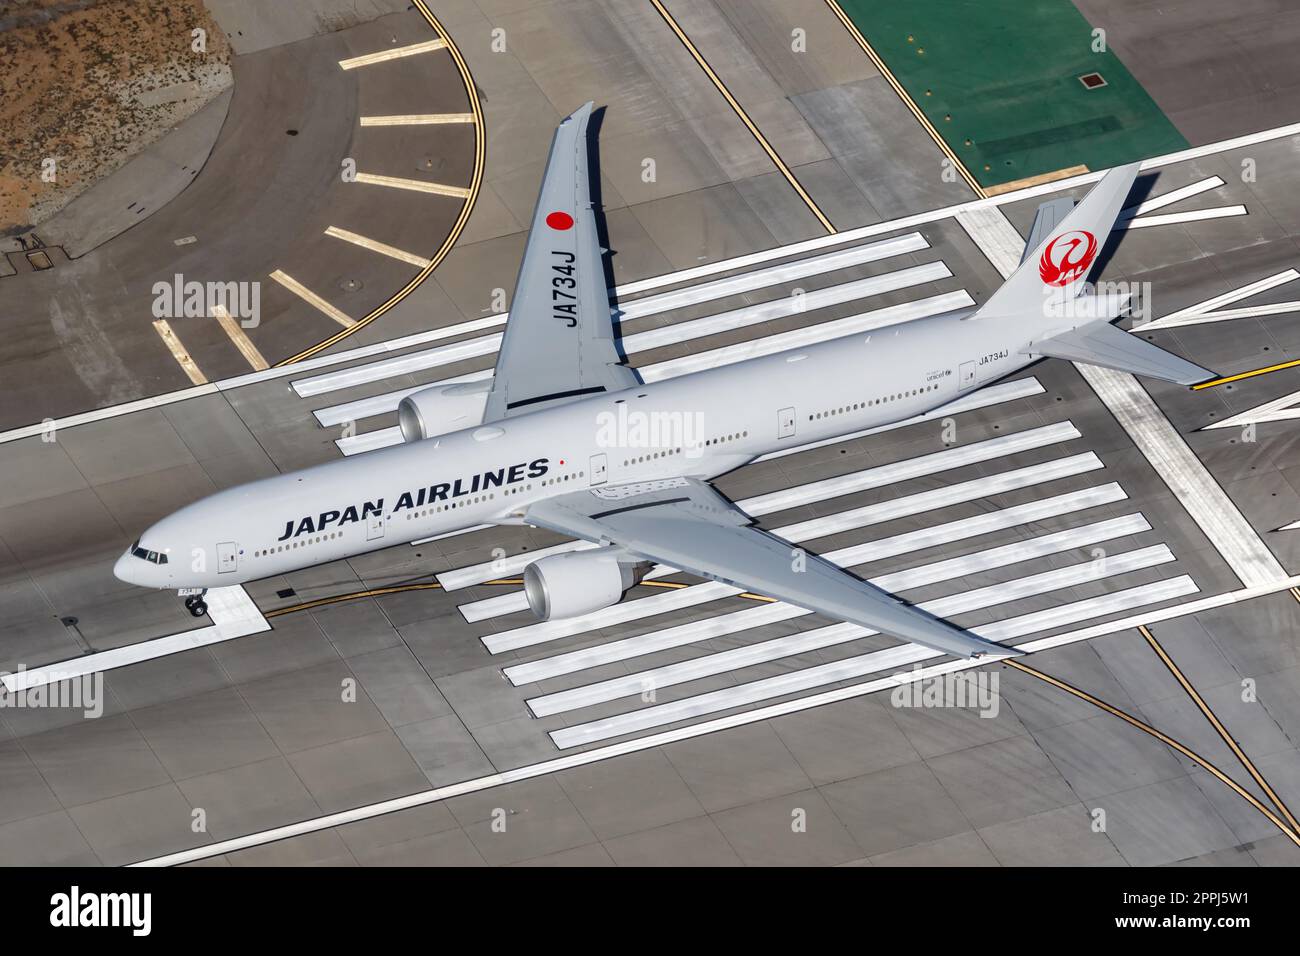 Japan Airlines Boeing 777-300(ER) airplane at Los Angeles airport in the United States aerial view Stock Photo